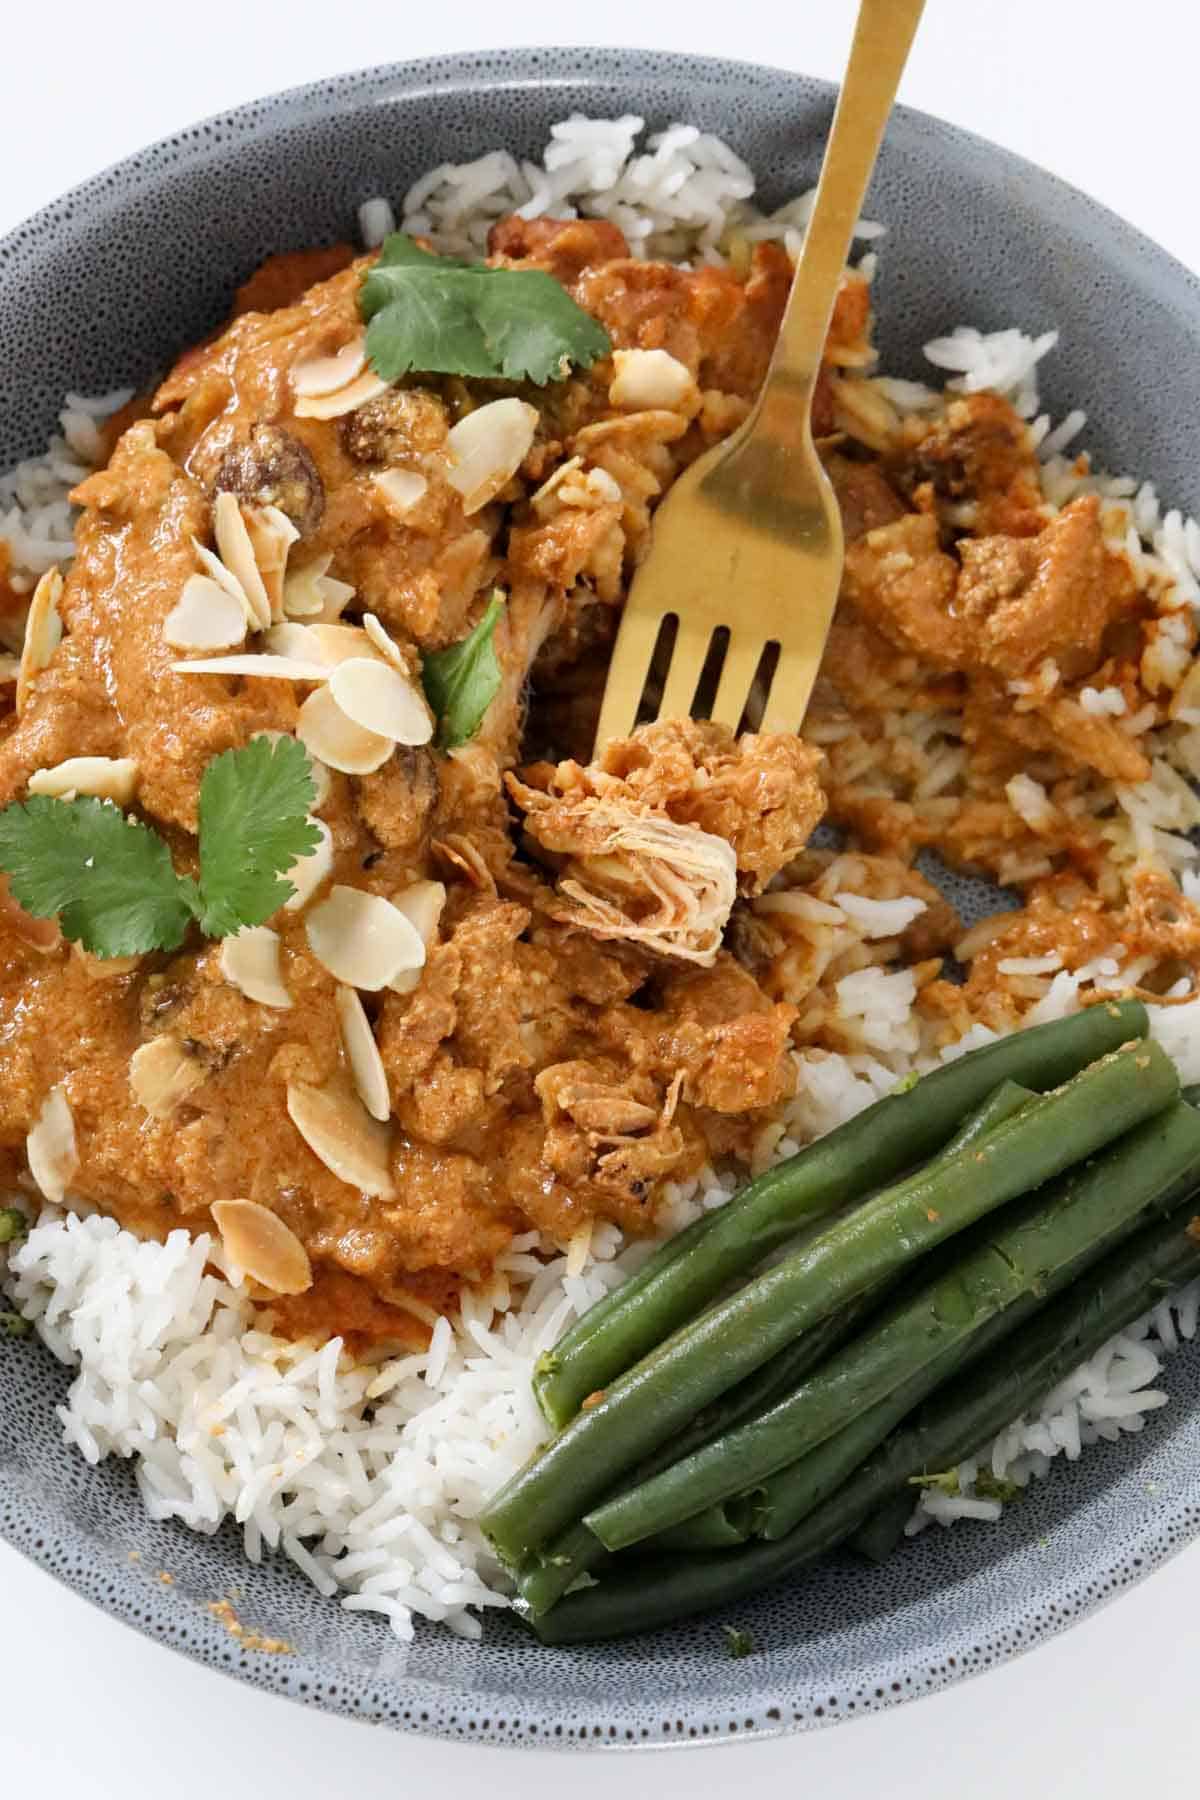 An indian chicken dish served in a bowl with rice and green beans, with a fork lifting a portion of the curry.